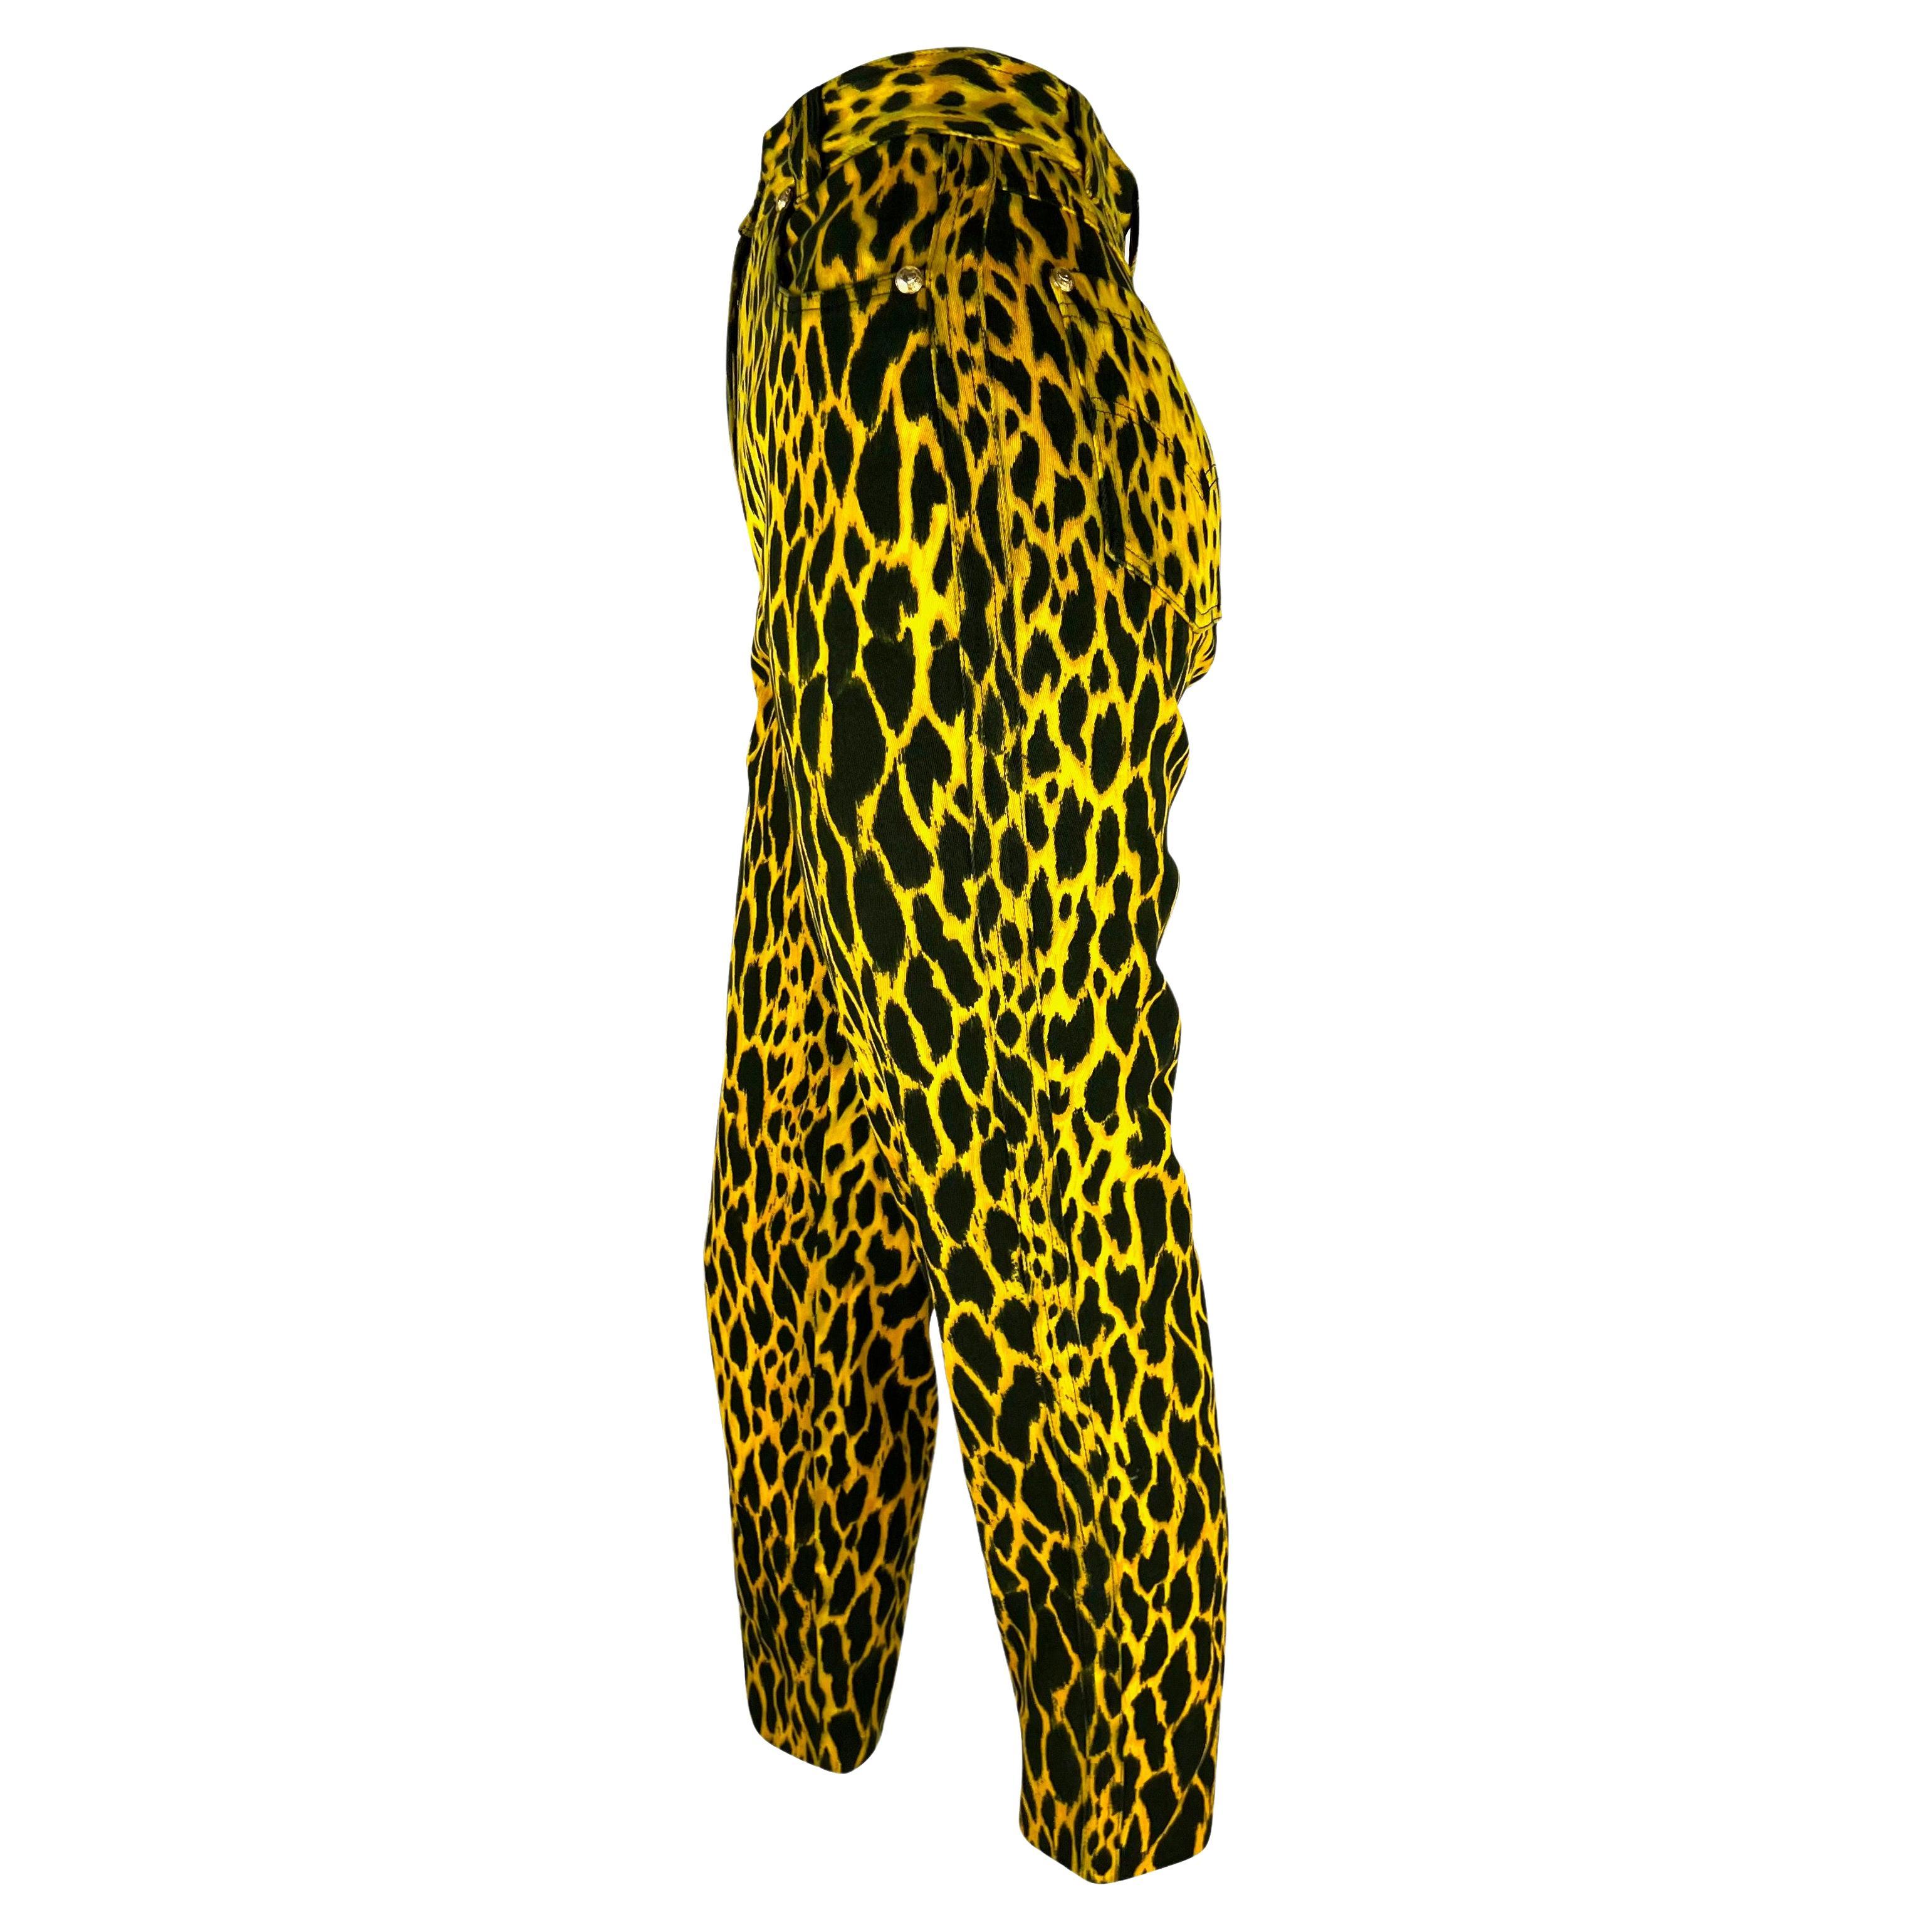 S/S 1992 Gianni Versace Runway Cheetah Print Yellow Black Cotton Stretch Jeans In Good Condition For Sale In West Hollywood, CA